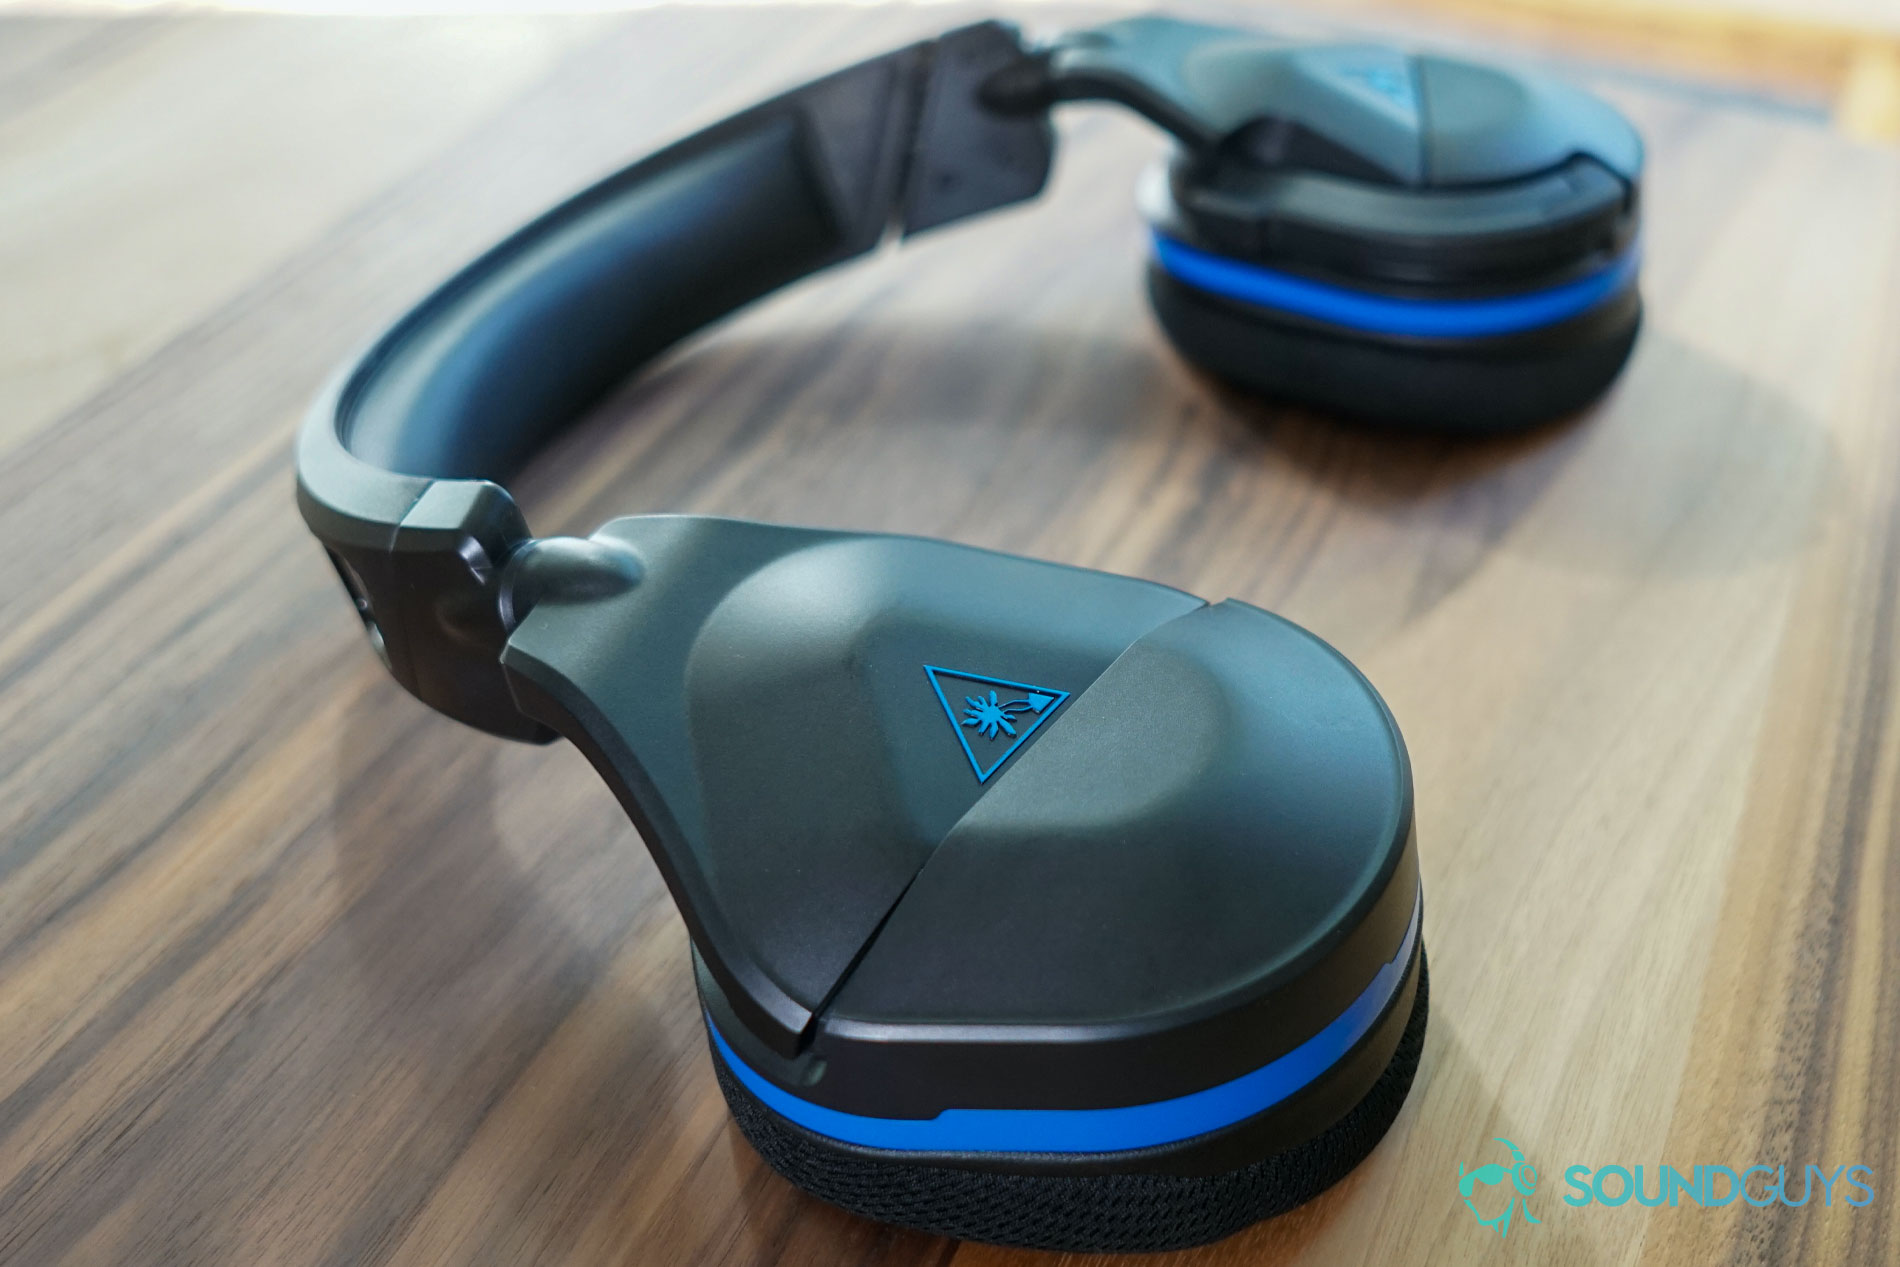 The Turtle Beach Stealth 600 Gen 2 gaming headset lies flat on a table.